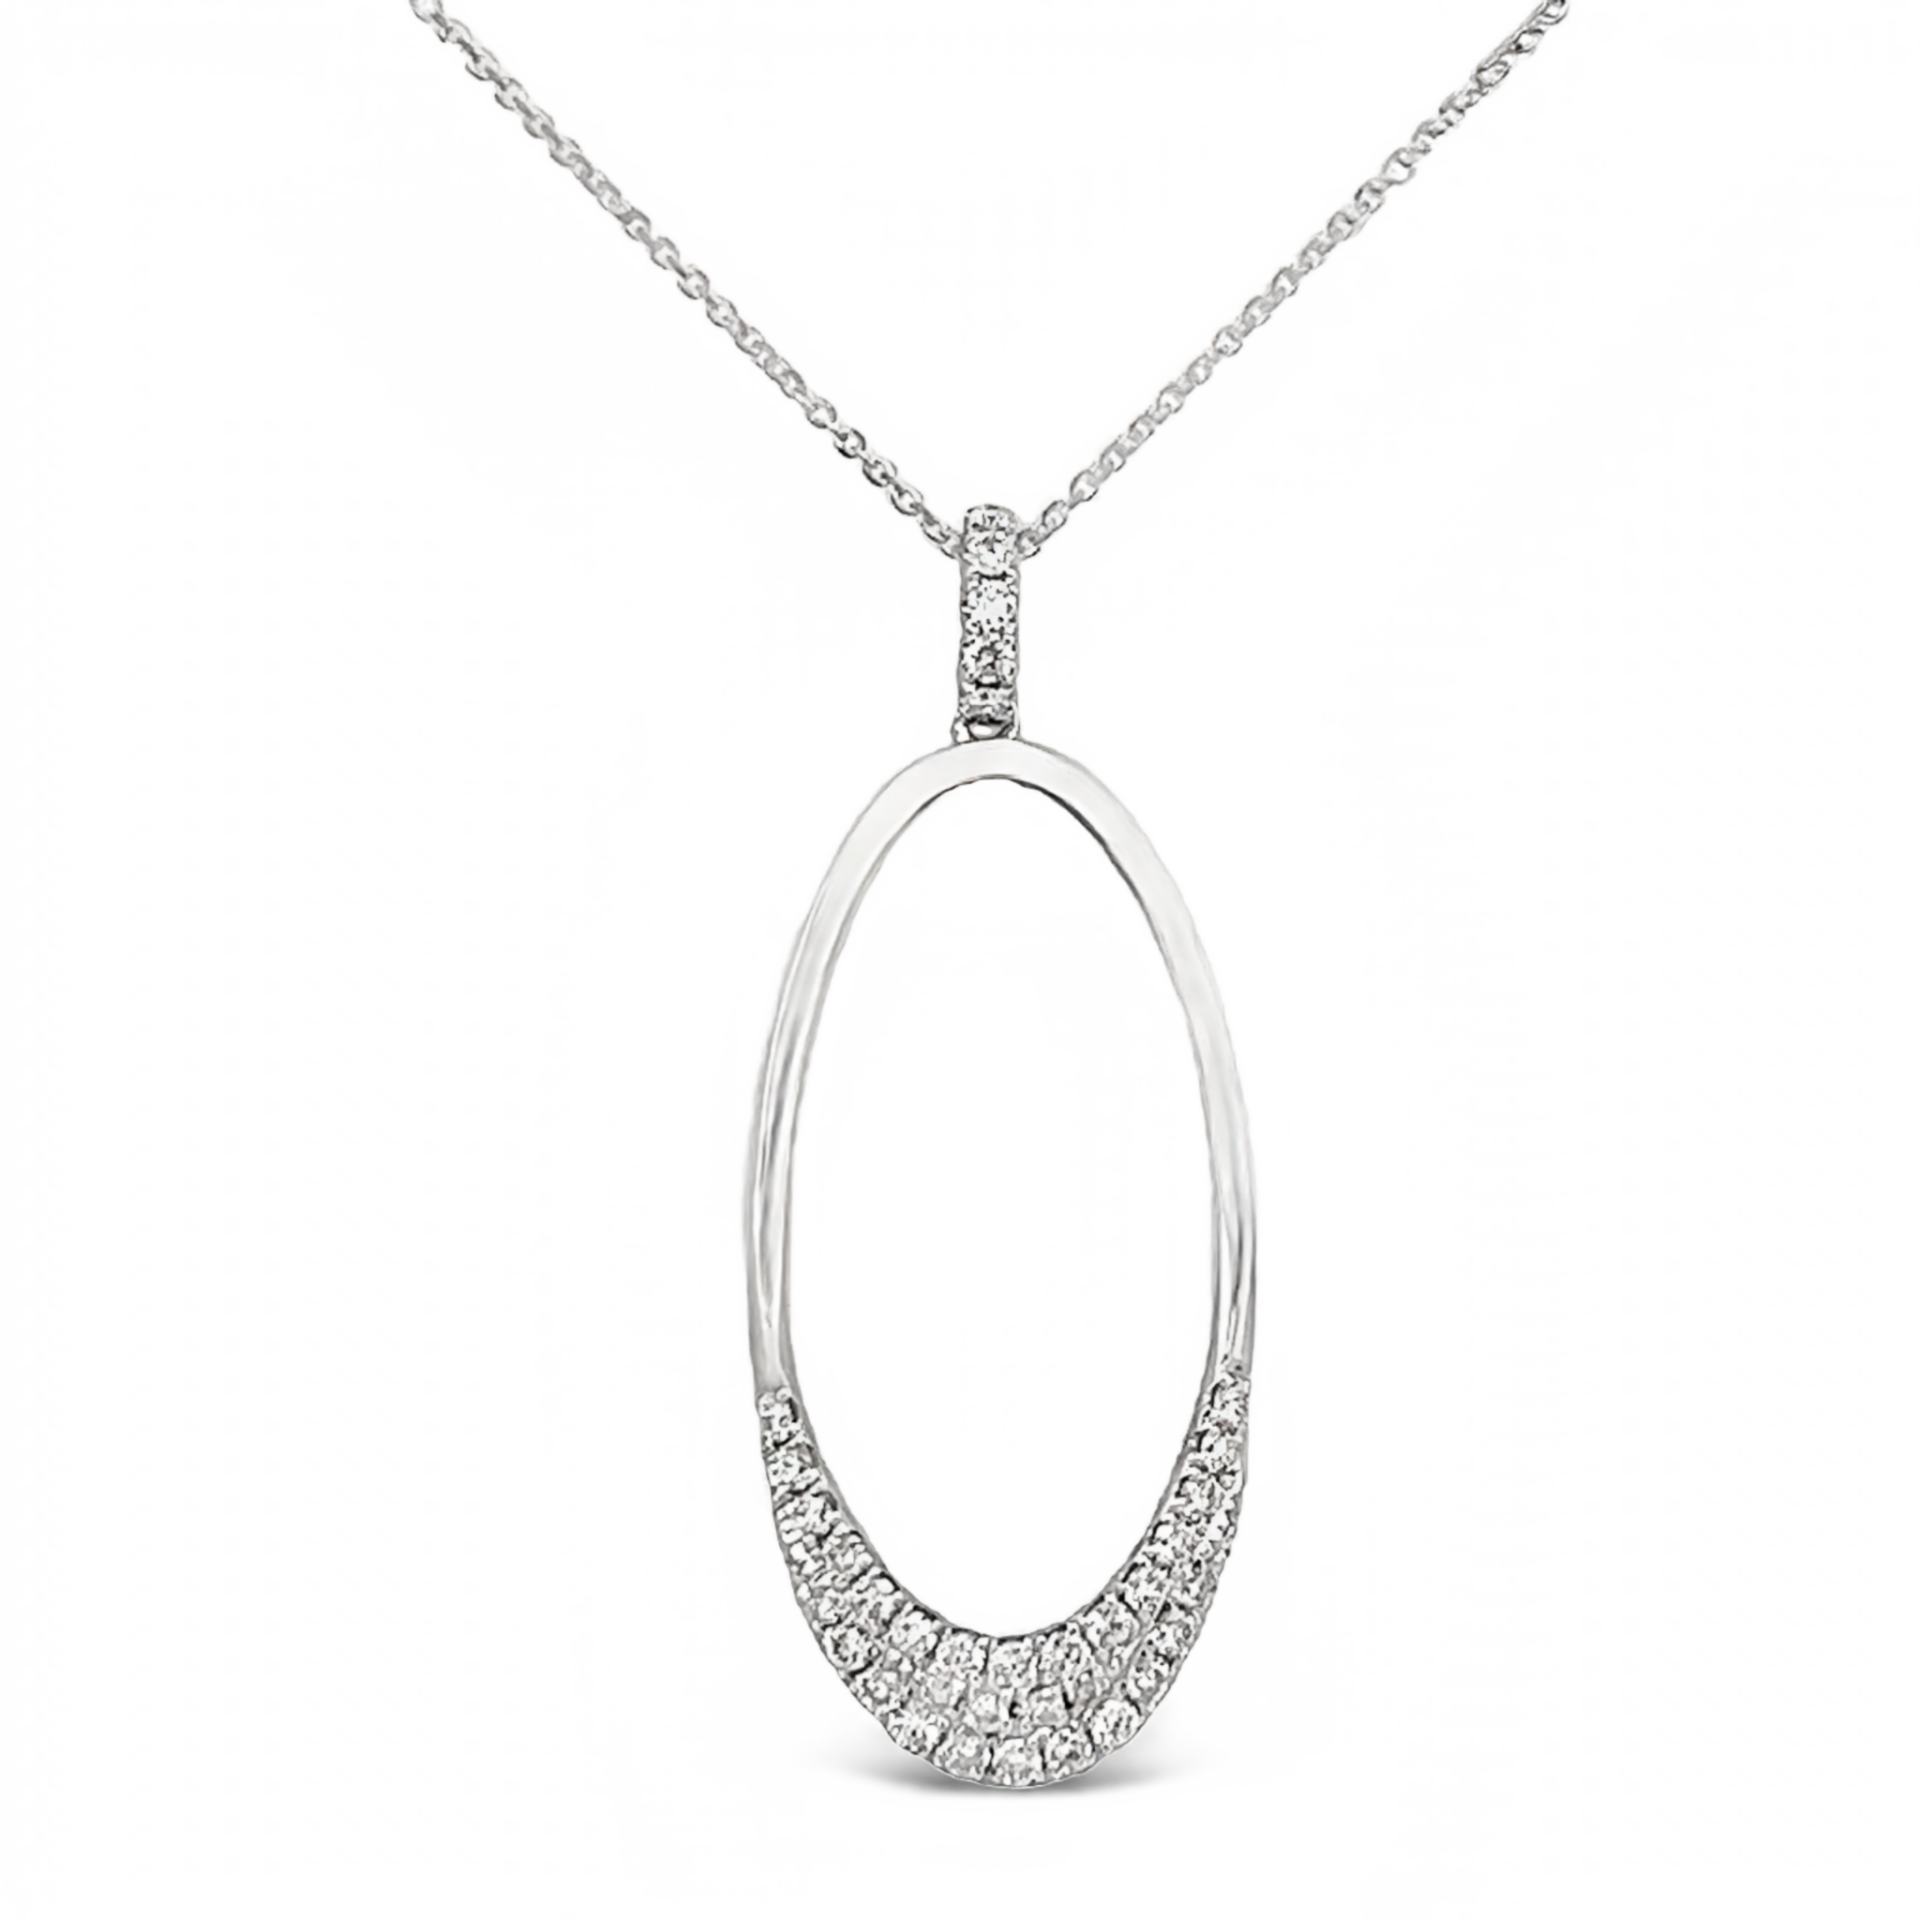 Free Form Oval Pendant